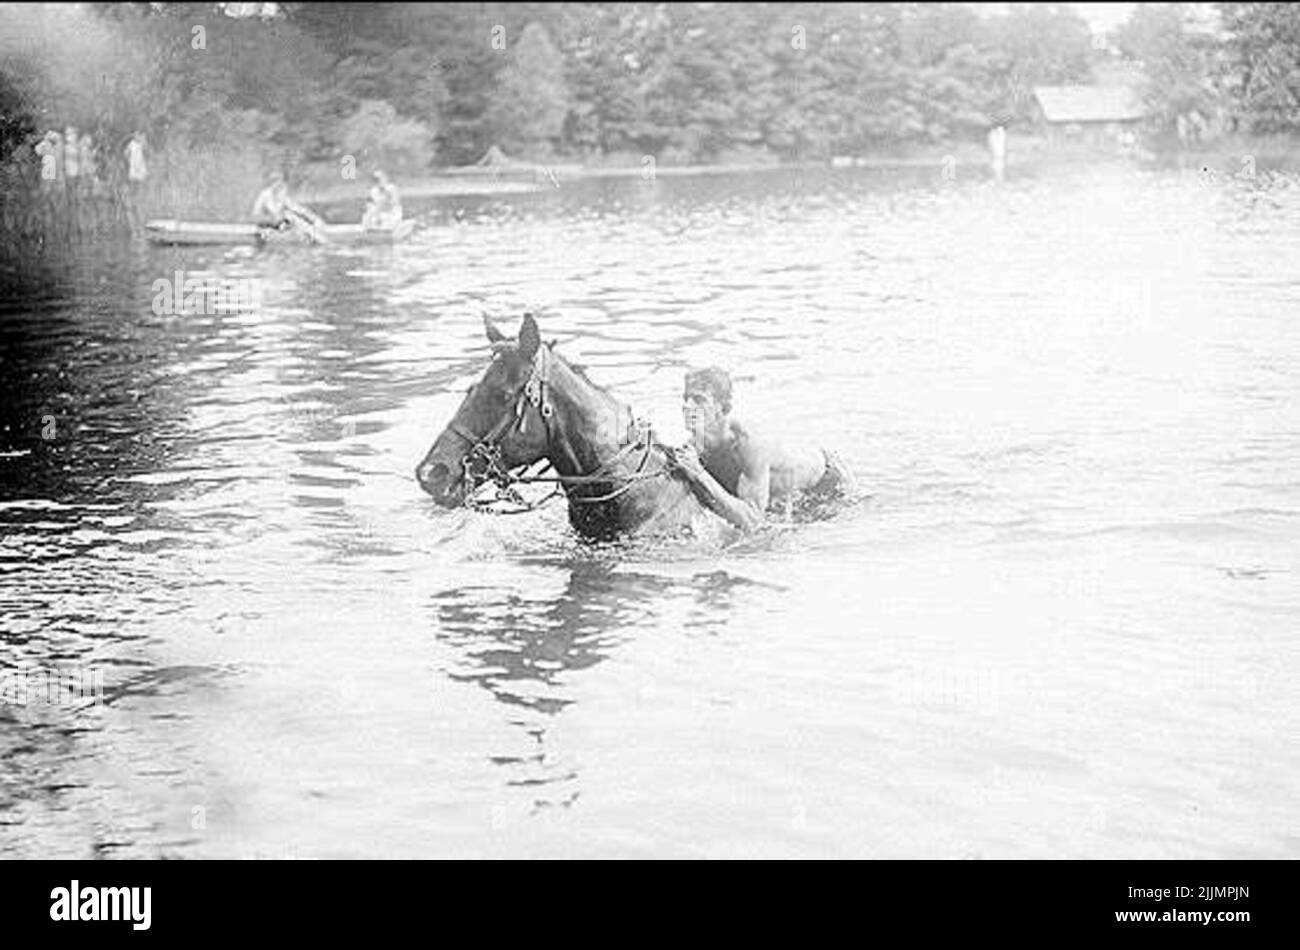 Patrol field competition for horse 1934, swimming by horse. The beach is approaching - the horse bottoms - the rider rushes to get up on the horse's back. Stock Photo